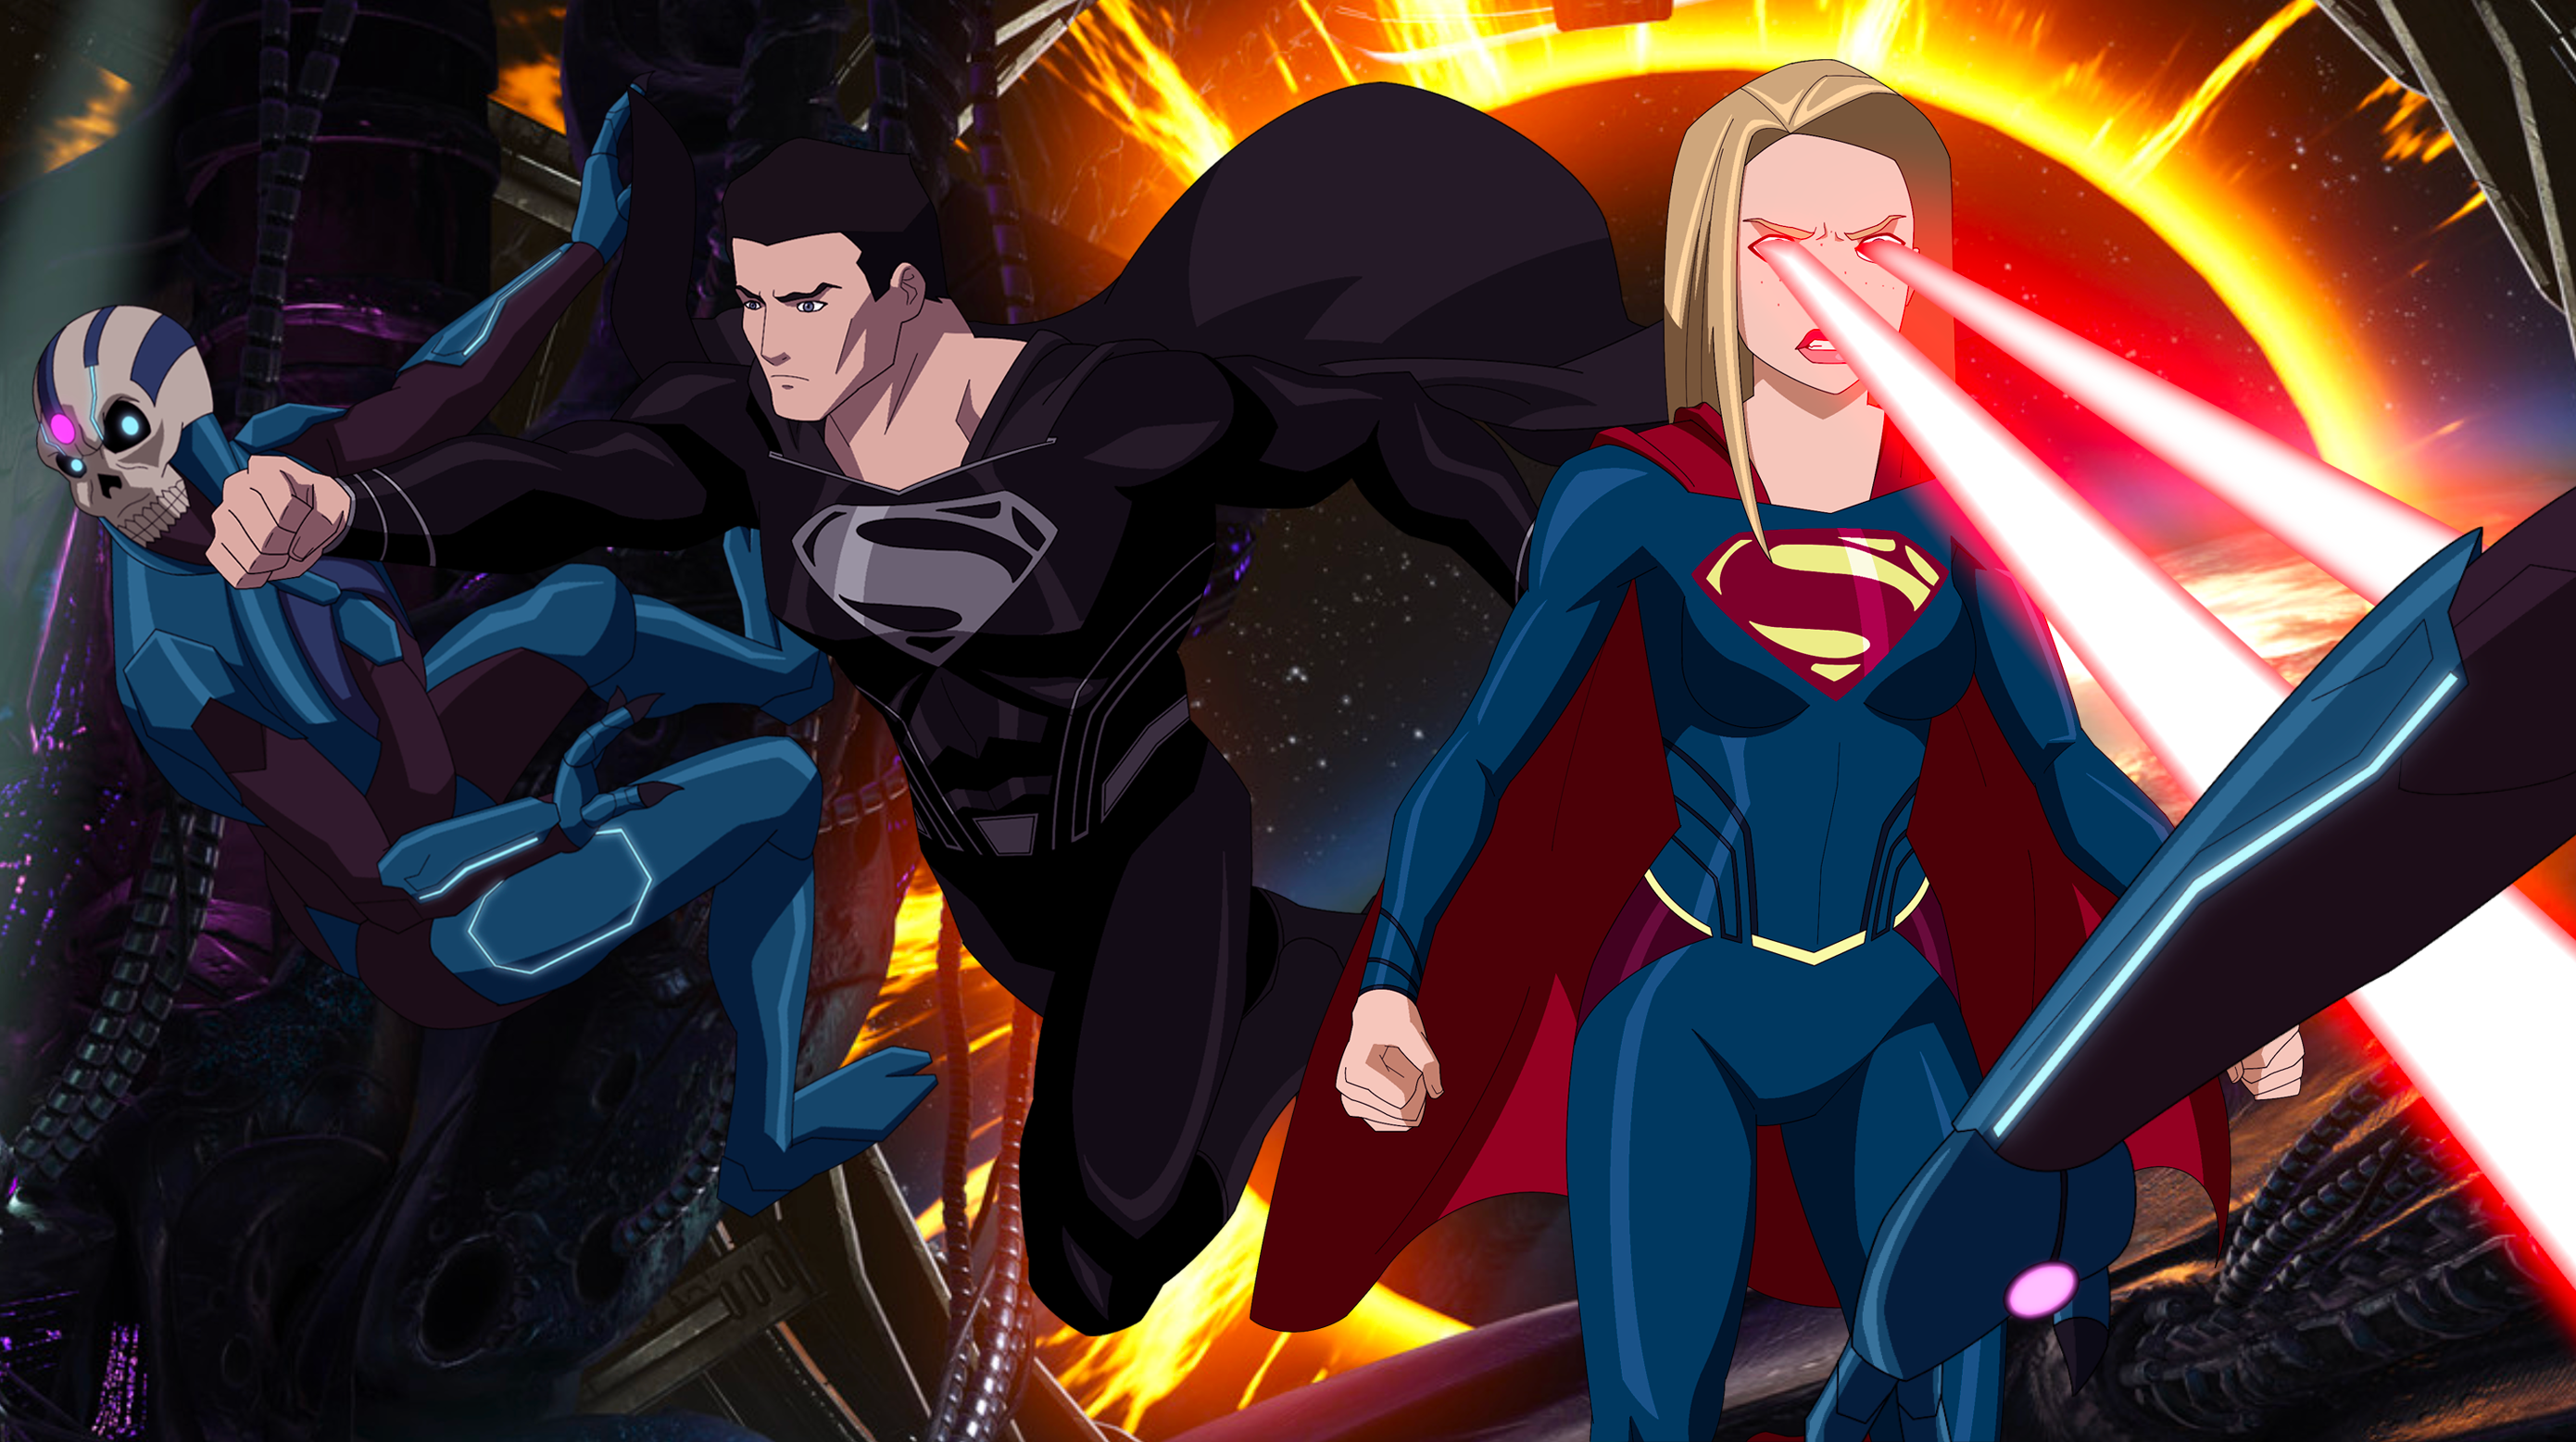 Superman and Supergirl vs Brainiac's Drones by Axel-Droga on DeviantArt